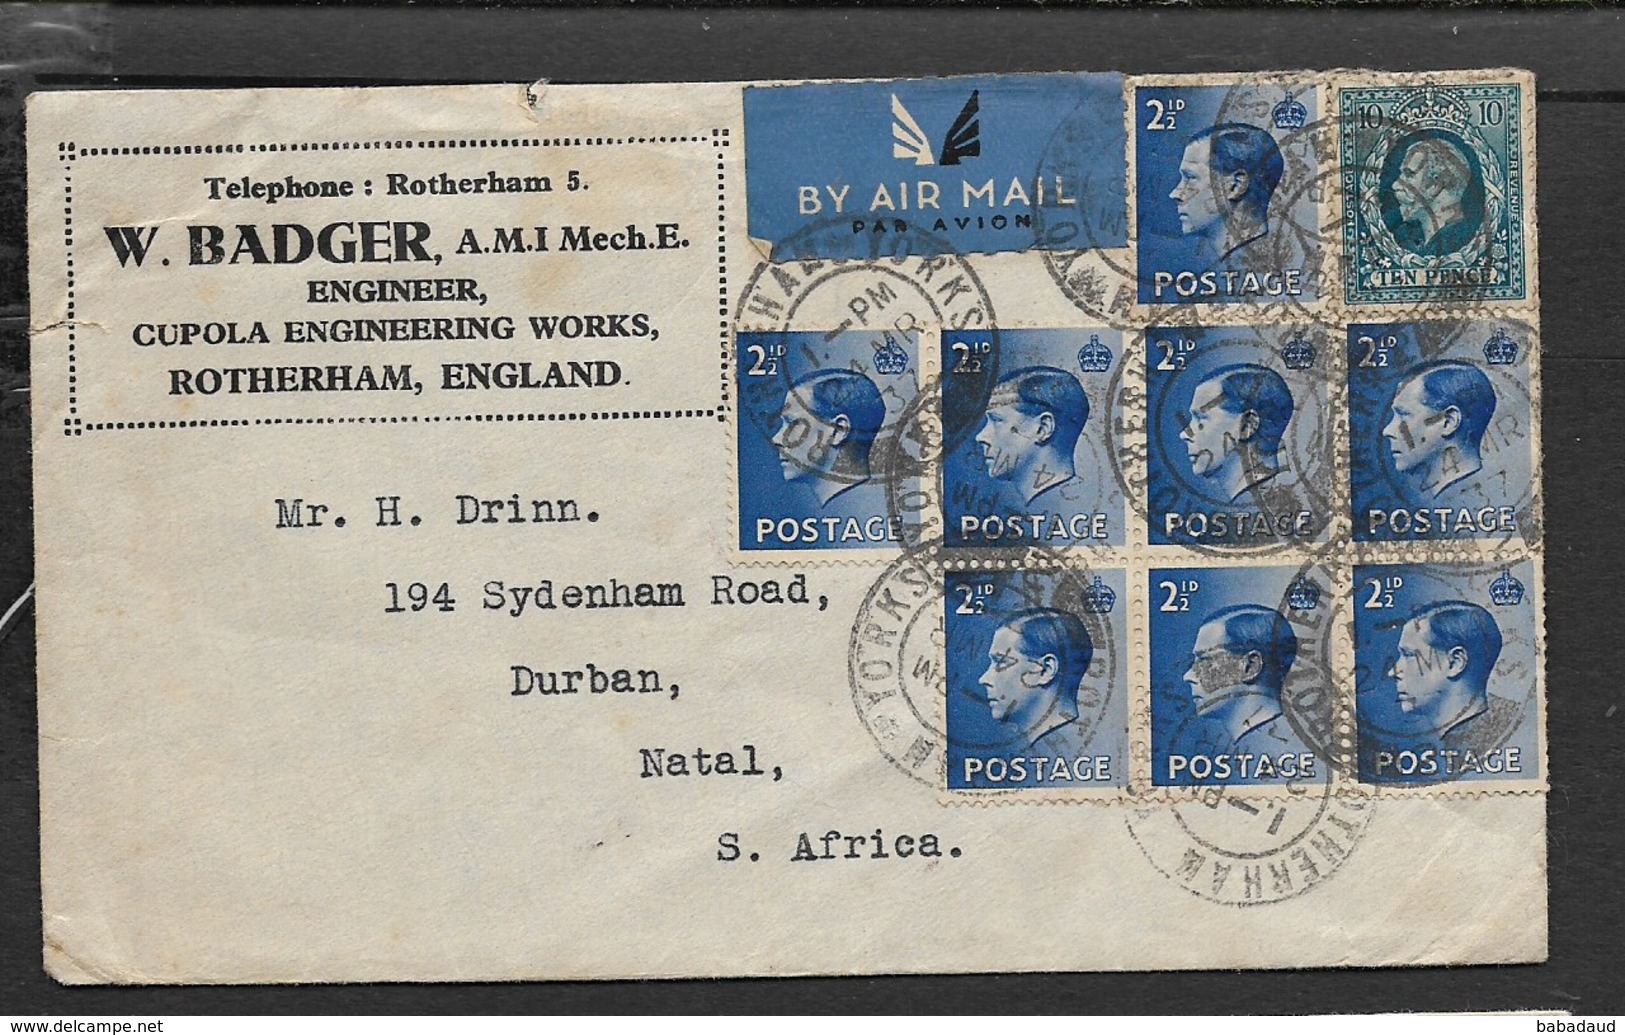 Great Britain, GVR, EVIIIR, 2'6 Air Mail ROTHERHAM YORKS 24 MR 37 > S.Africa (from W.BADGER Engineer, Rotherham) - Covers & Documents